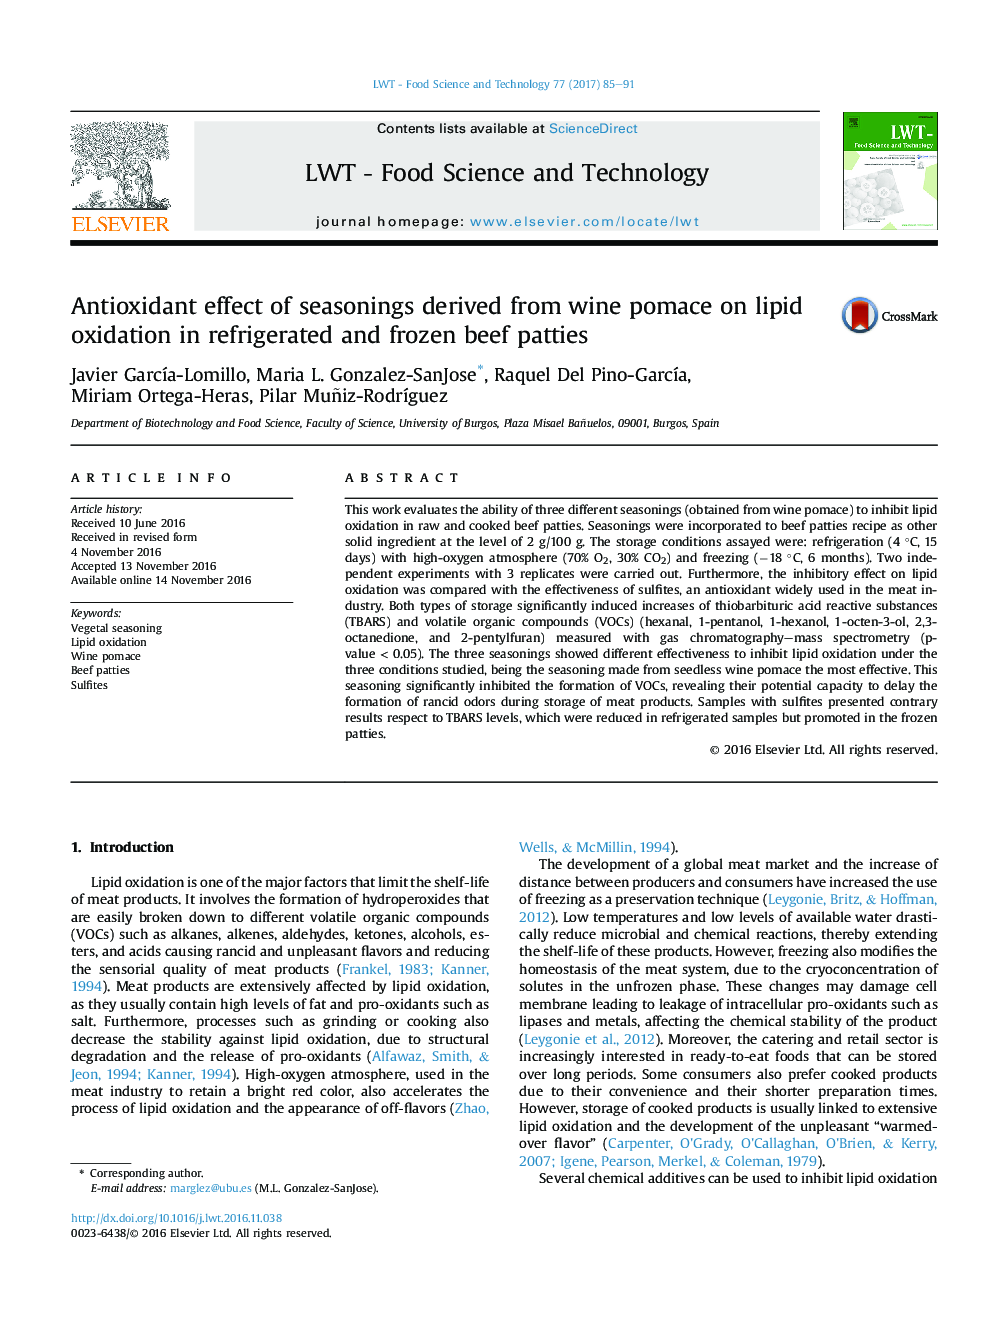 Antioxidant effect of seasonings derived from wine pomace on lipid oxidation in refrigerated and frozen beef patties